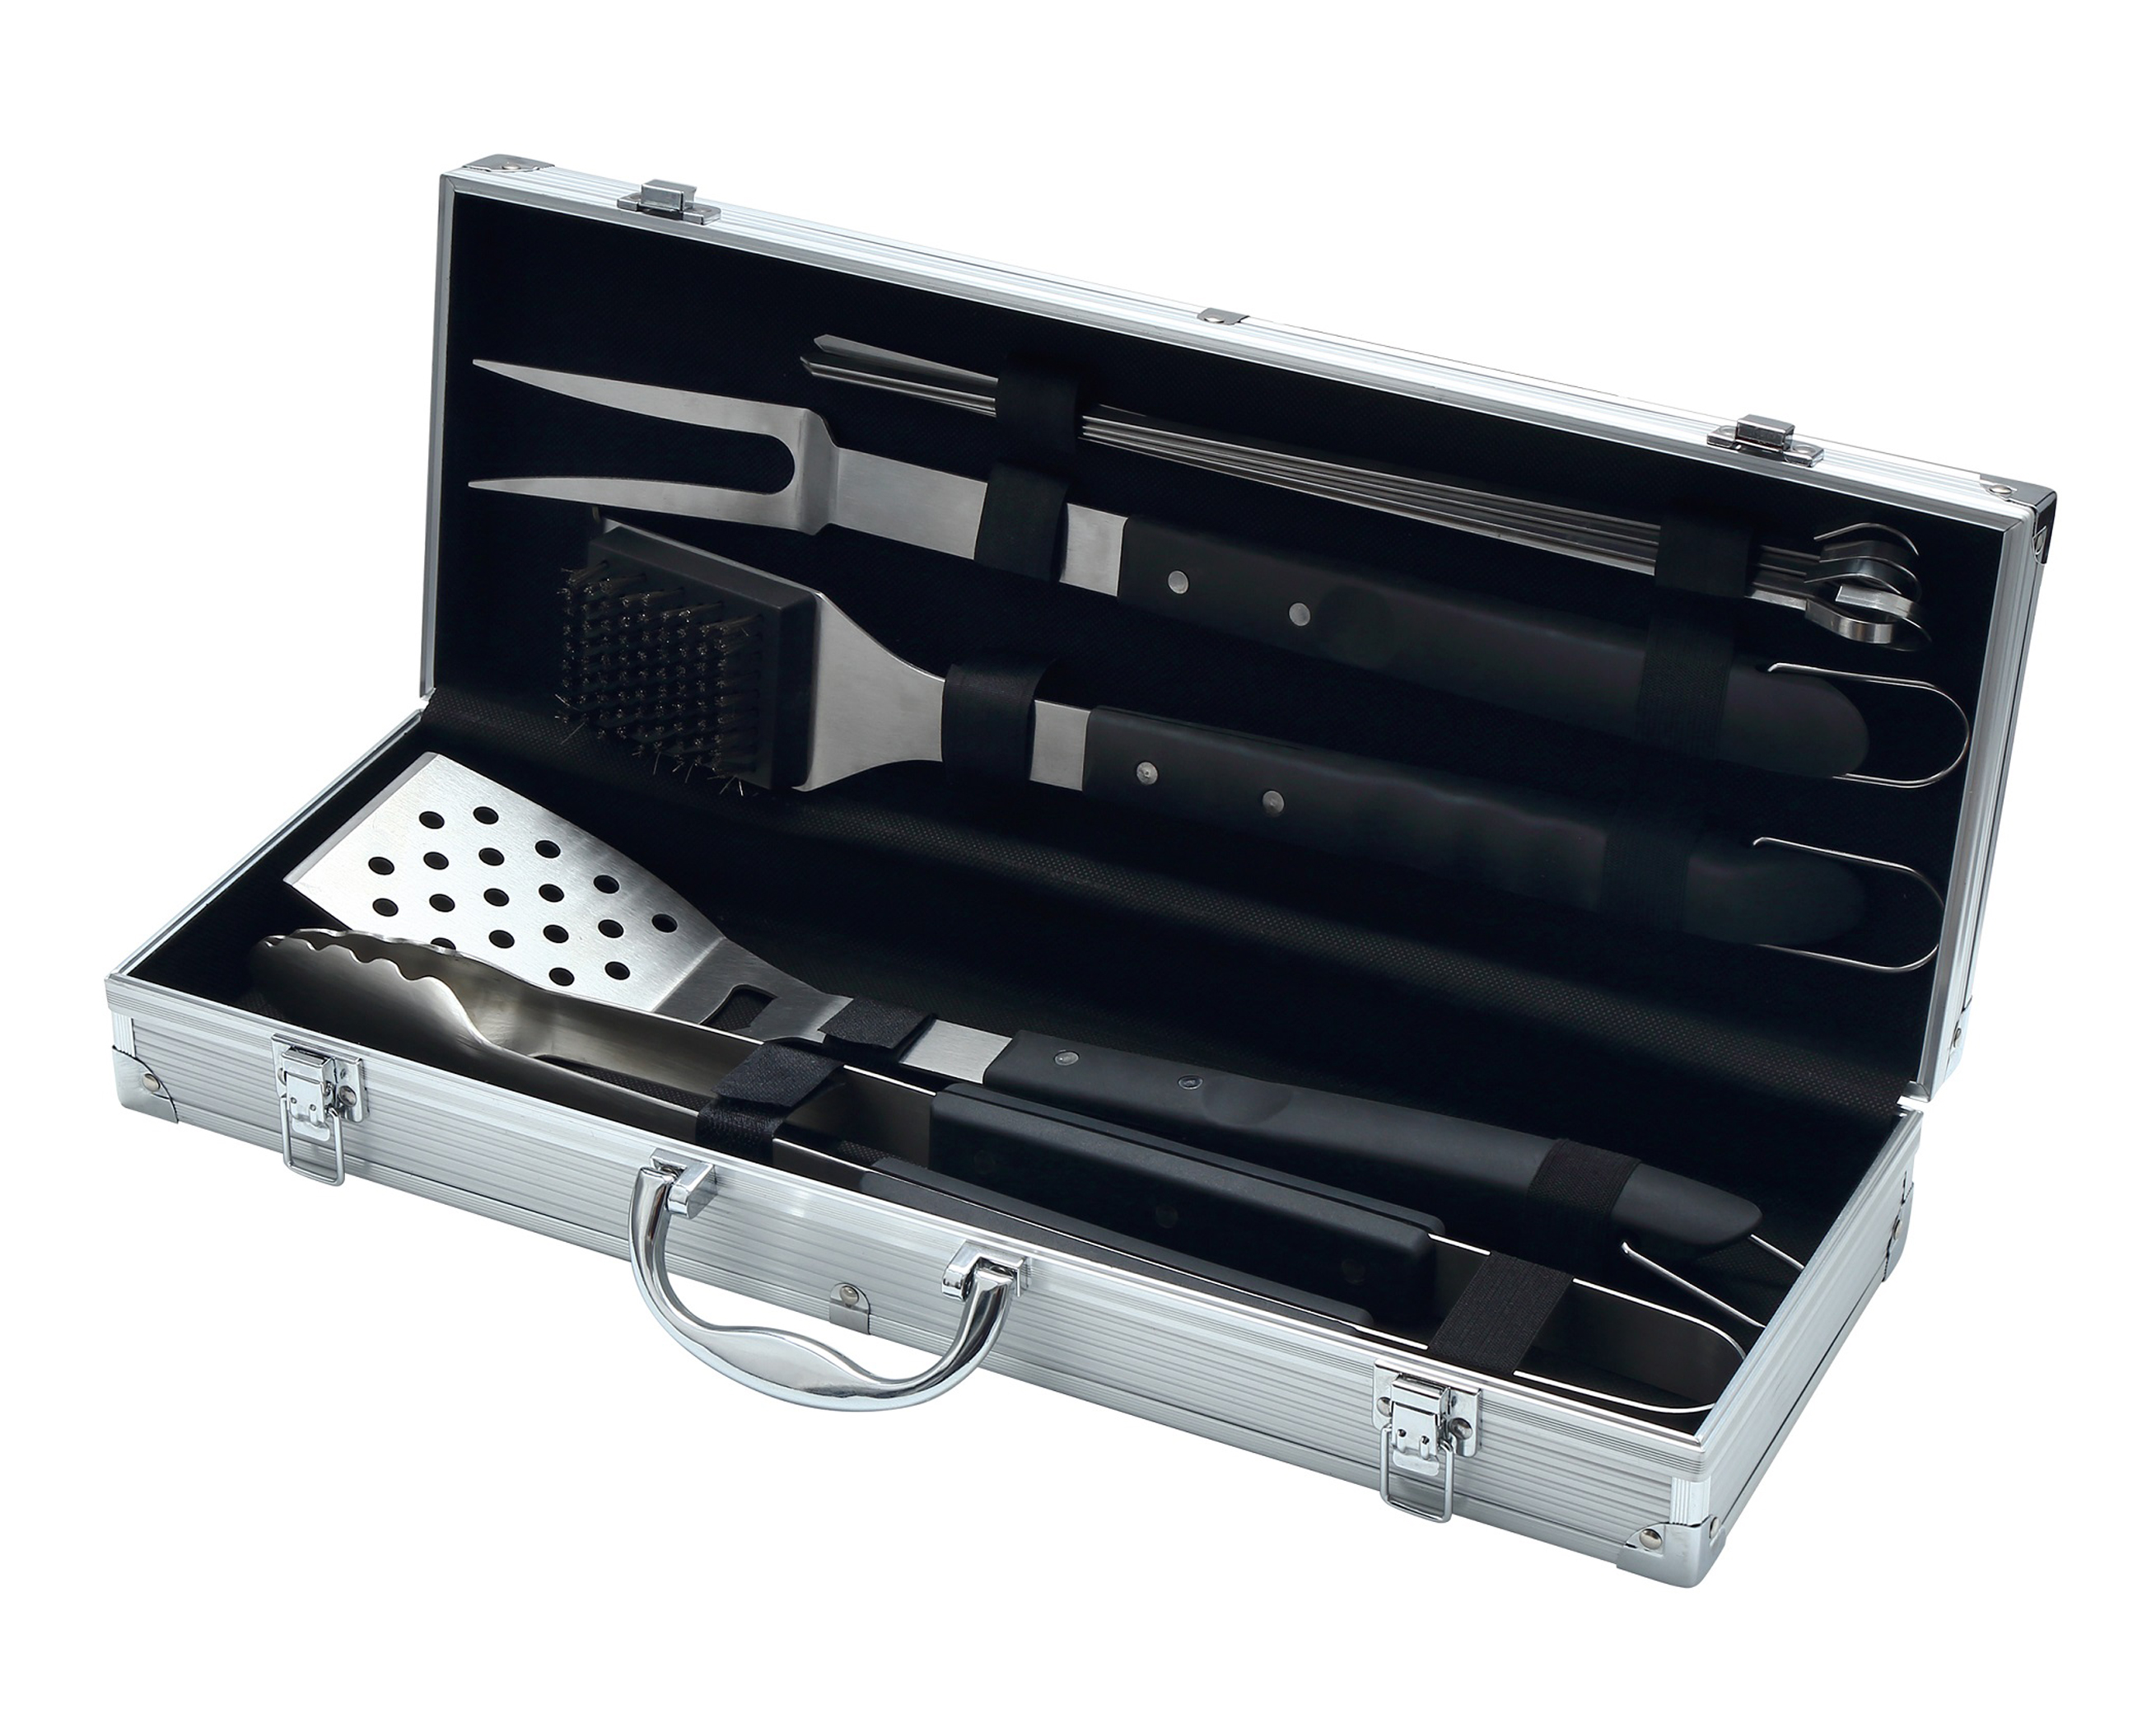 Barbecues should be a breeze with this accessories kit (B&Q/PA)